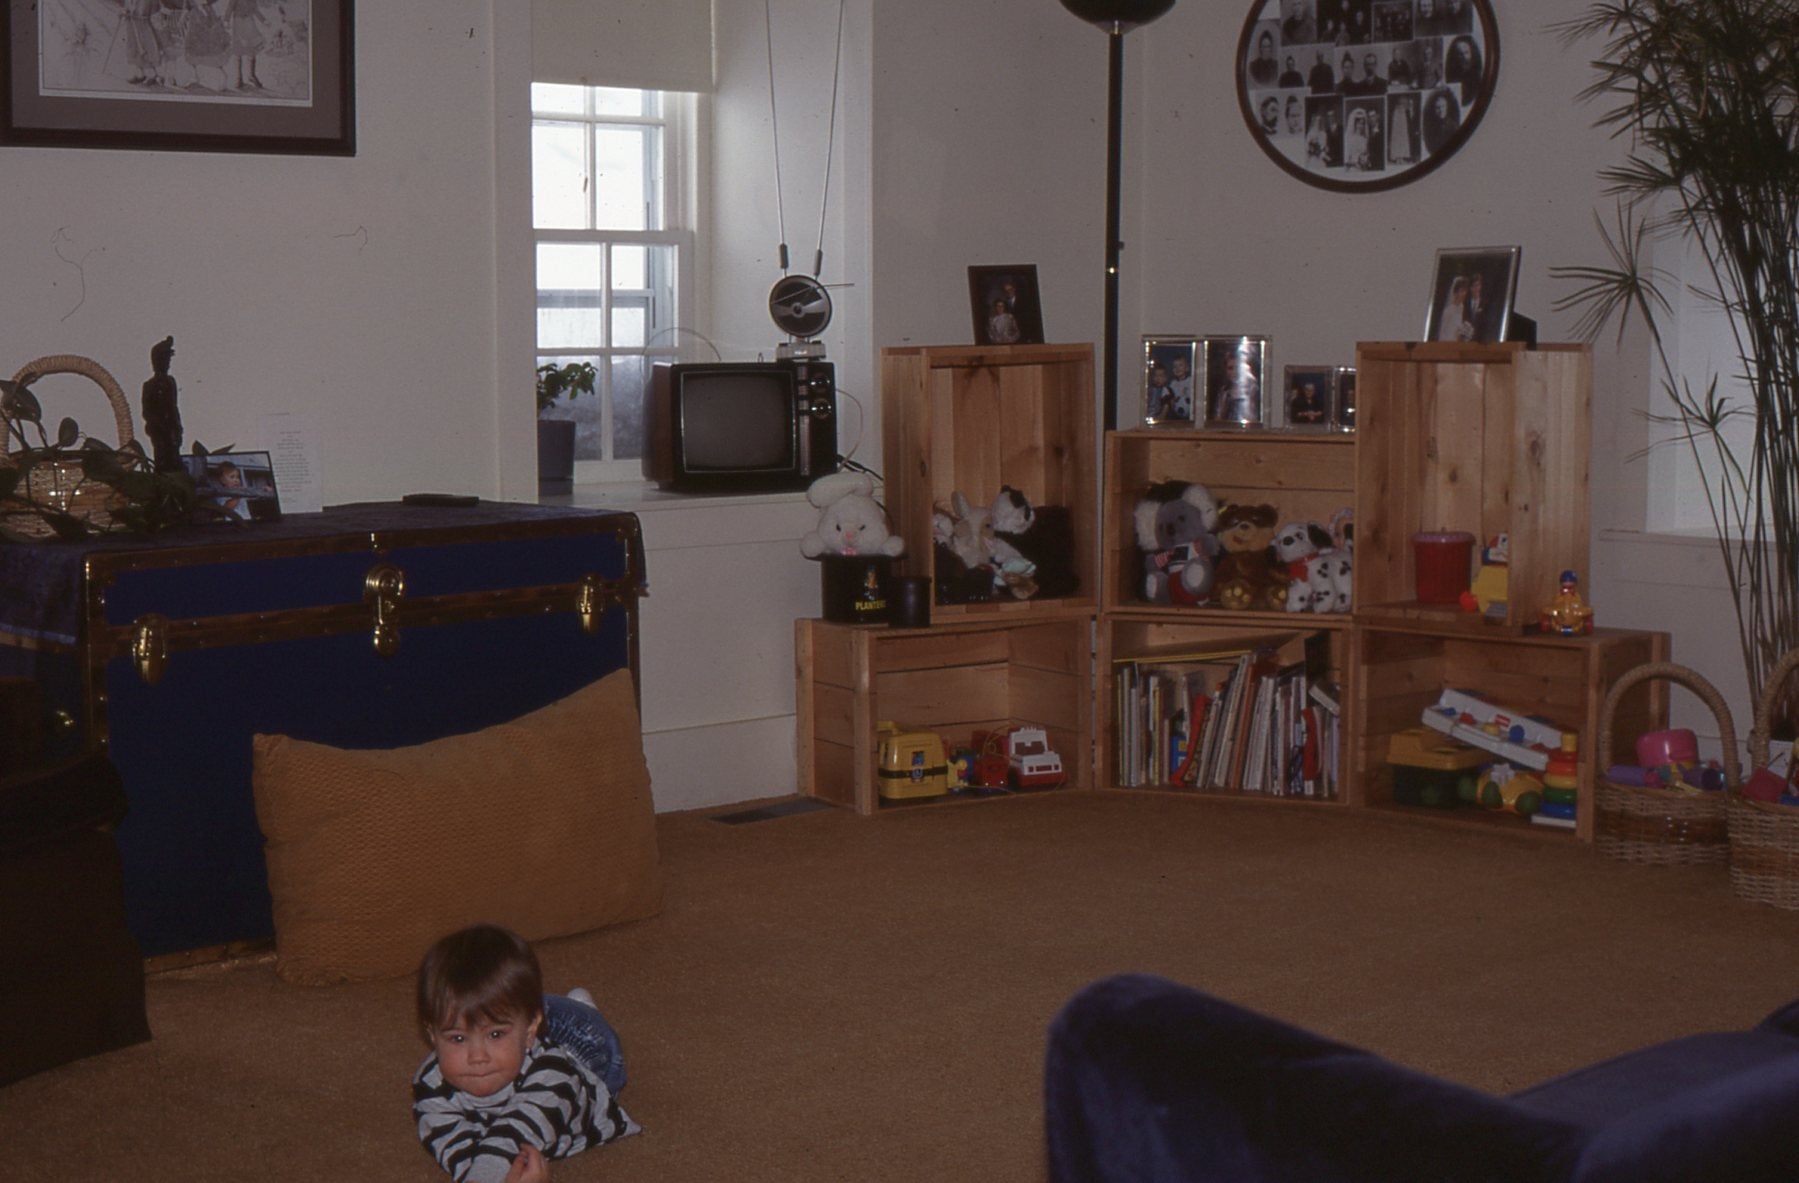 a dull photo of the brubacher house living room. In the bottom left, a small child lays on the floor, smiling at the camera.